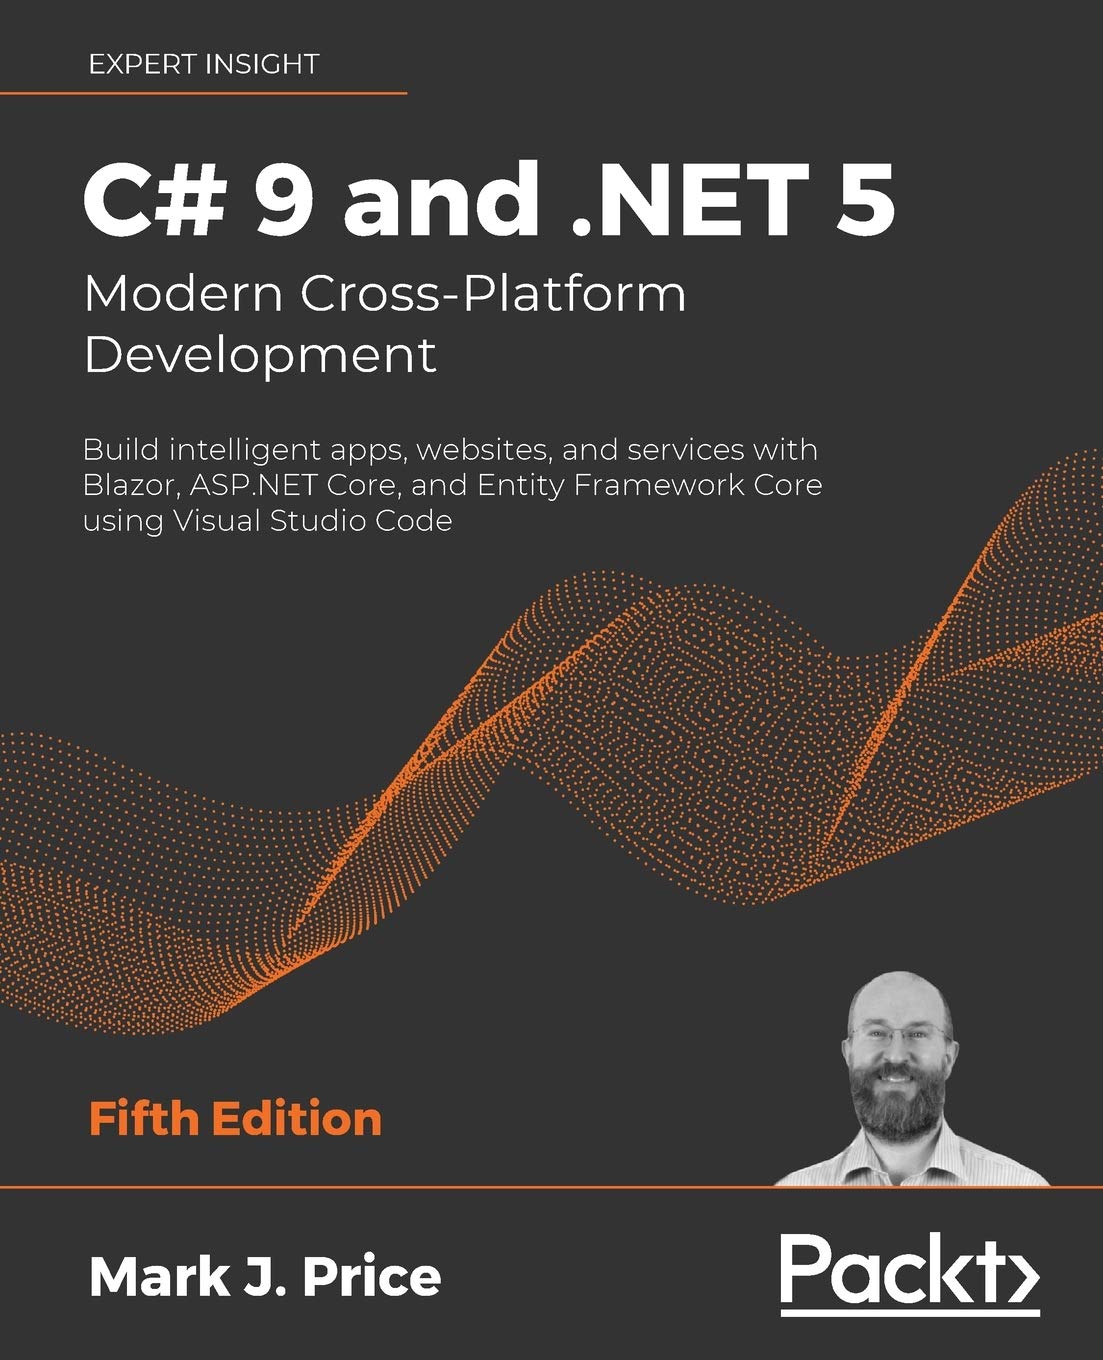 Mua C# 9 and .NET 5 – Modern Cross-Platform Development: Build intelligent  apps, websites, and services with Blazor,  Core, and Entity  Framework Core using Visual Studio Code, 5th Edition trên Amazon